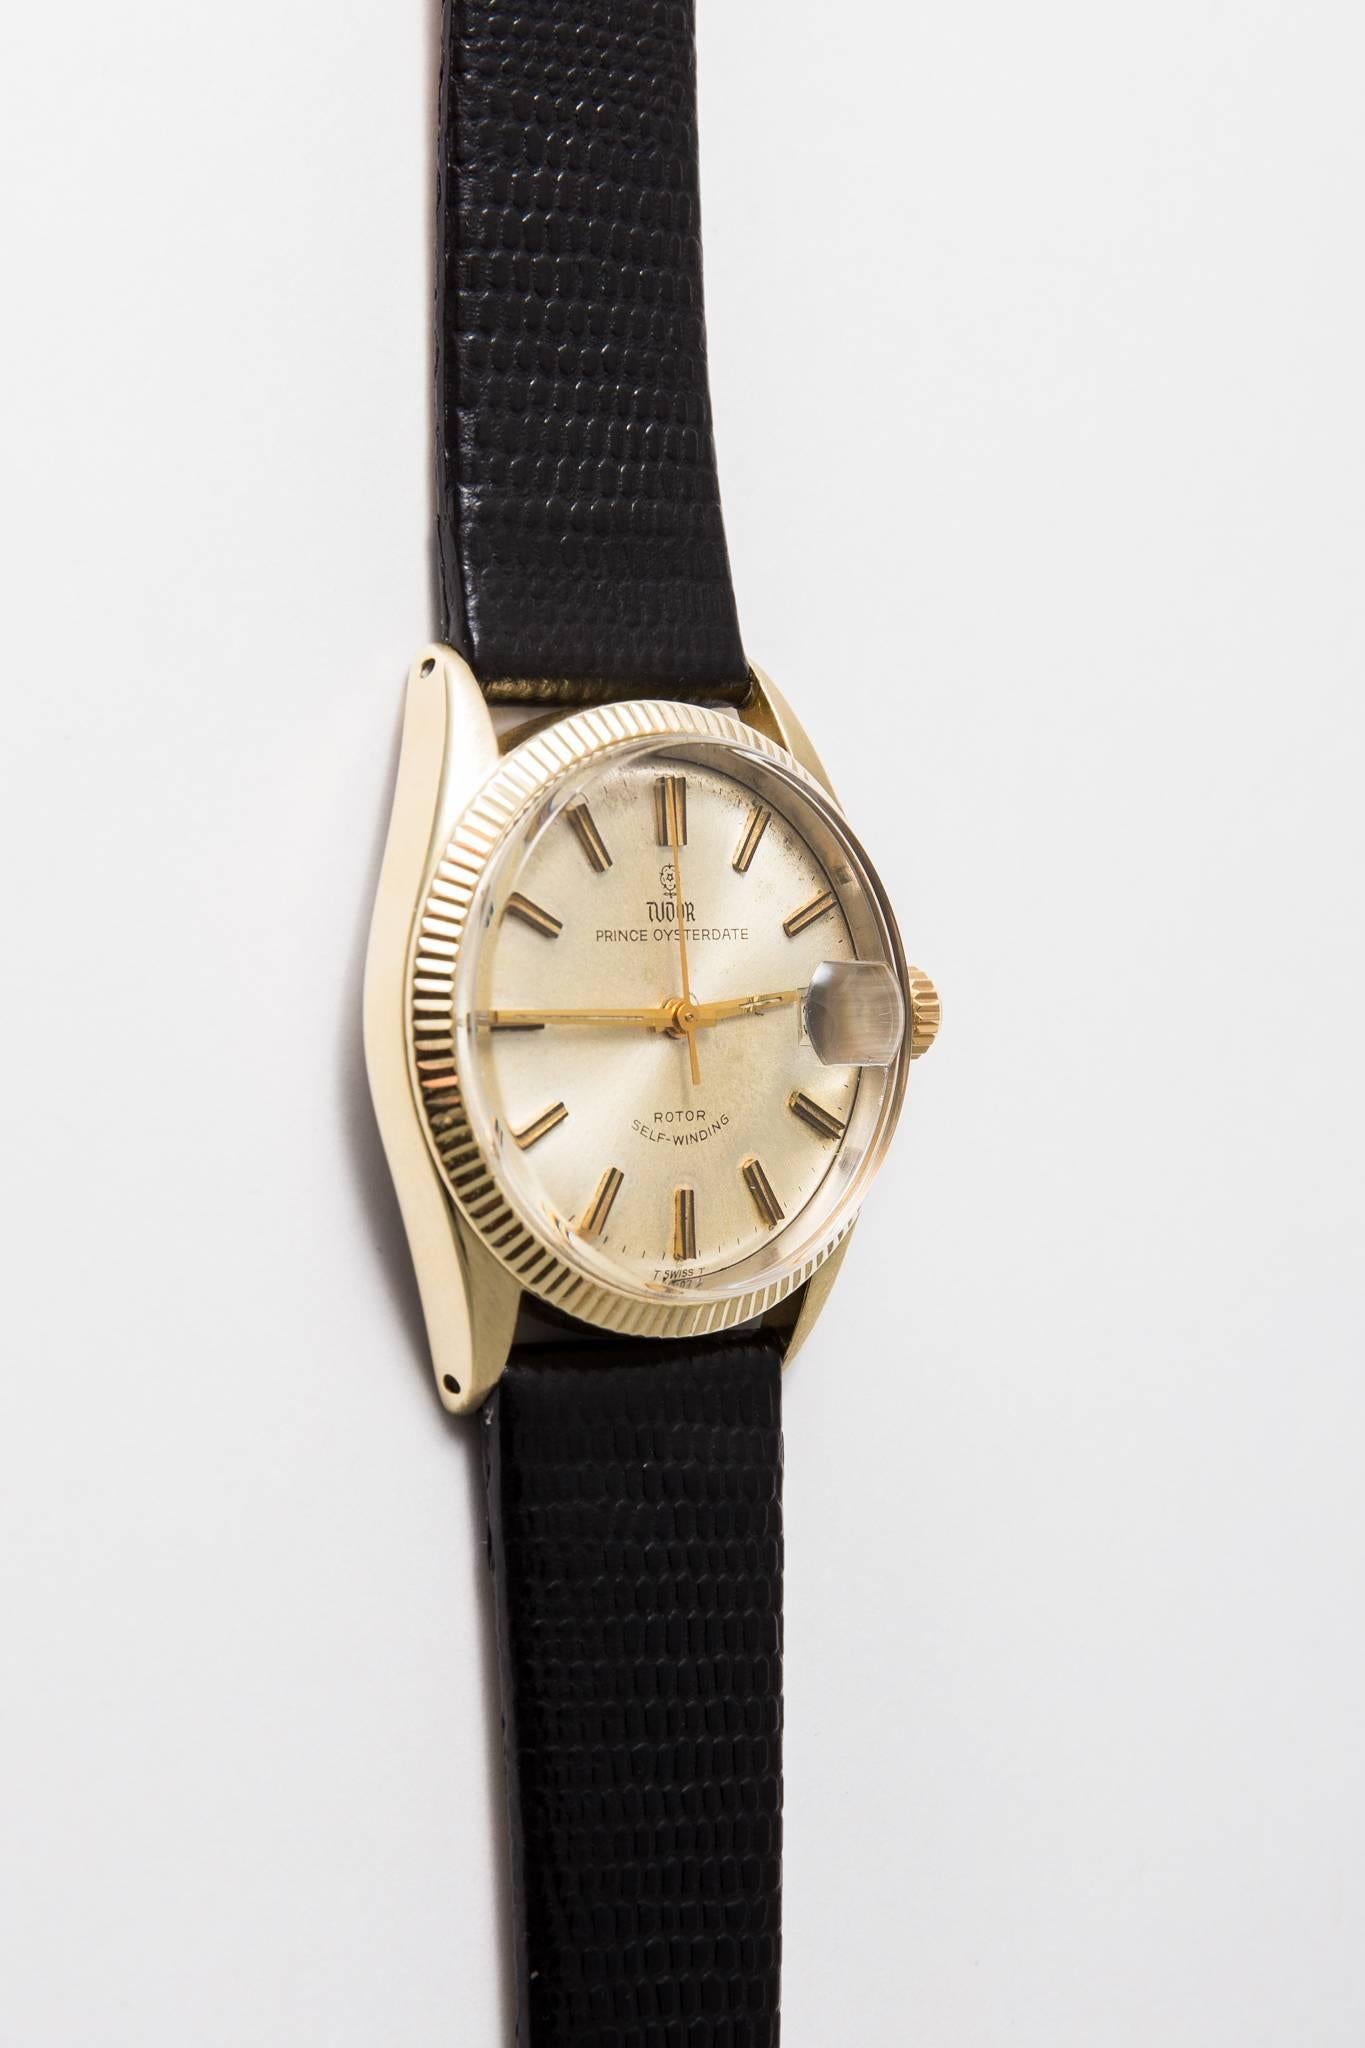 Beacon Hill Jewelers Presents:

A classic vintage mens automatic winding, Rolex Tudor wrist watch in yellow gold and stainless steel.  Featuring a solid 14 karat gold bezel and a yellow gold cap over a stainless steel case, this watch is a timeless